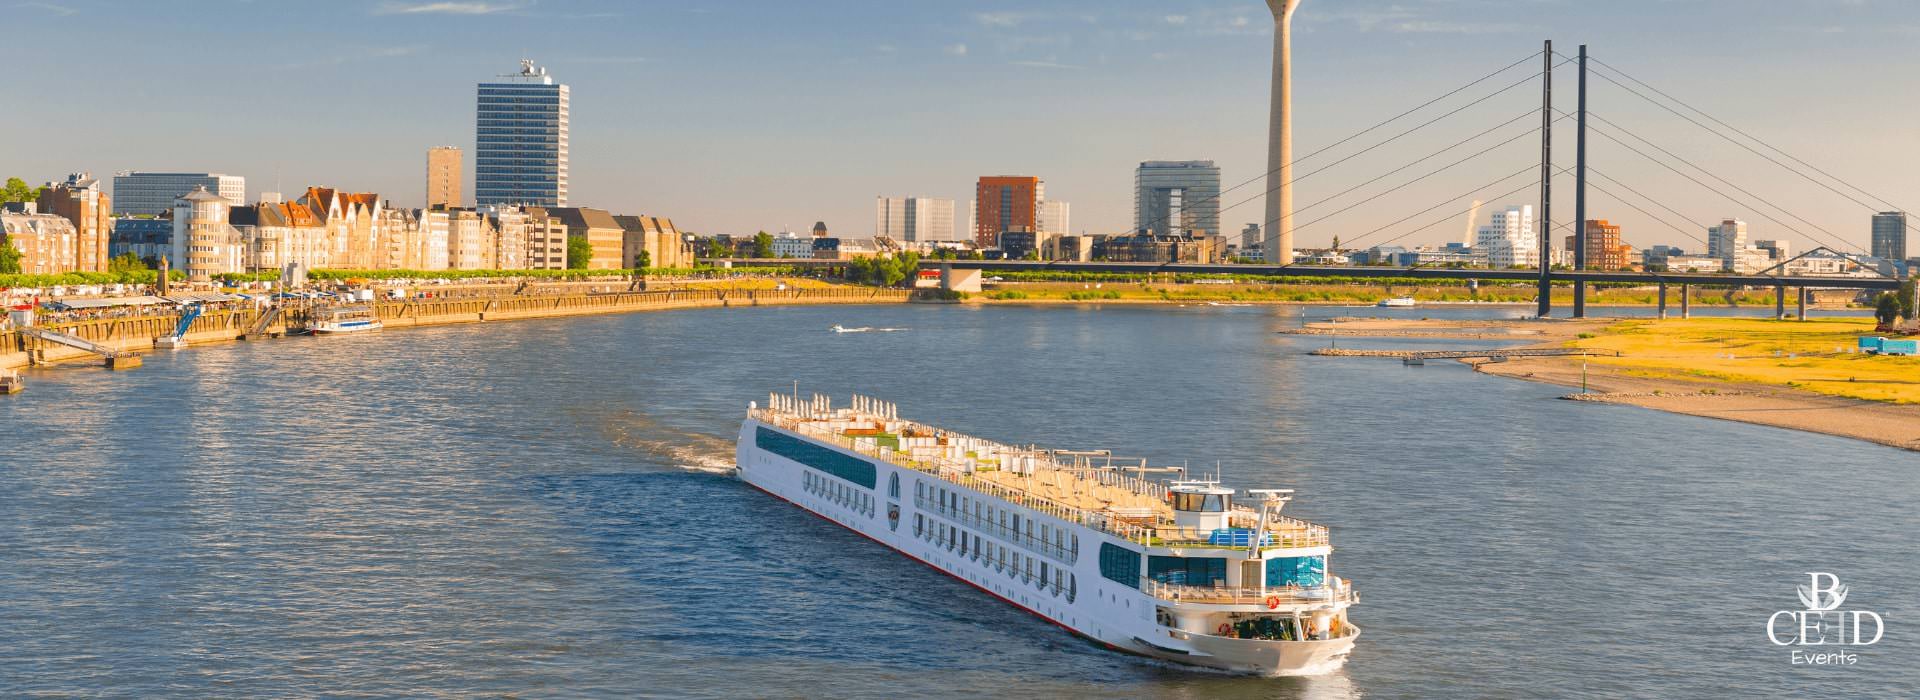 Ship Charter Duesseldorf and Cologne - Events with b-ceed Eventagentur